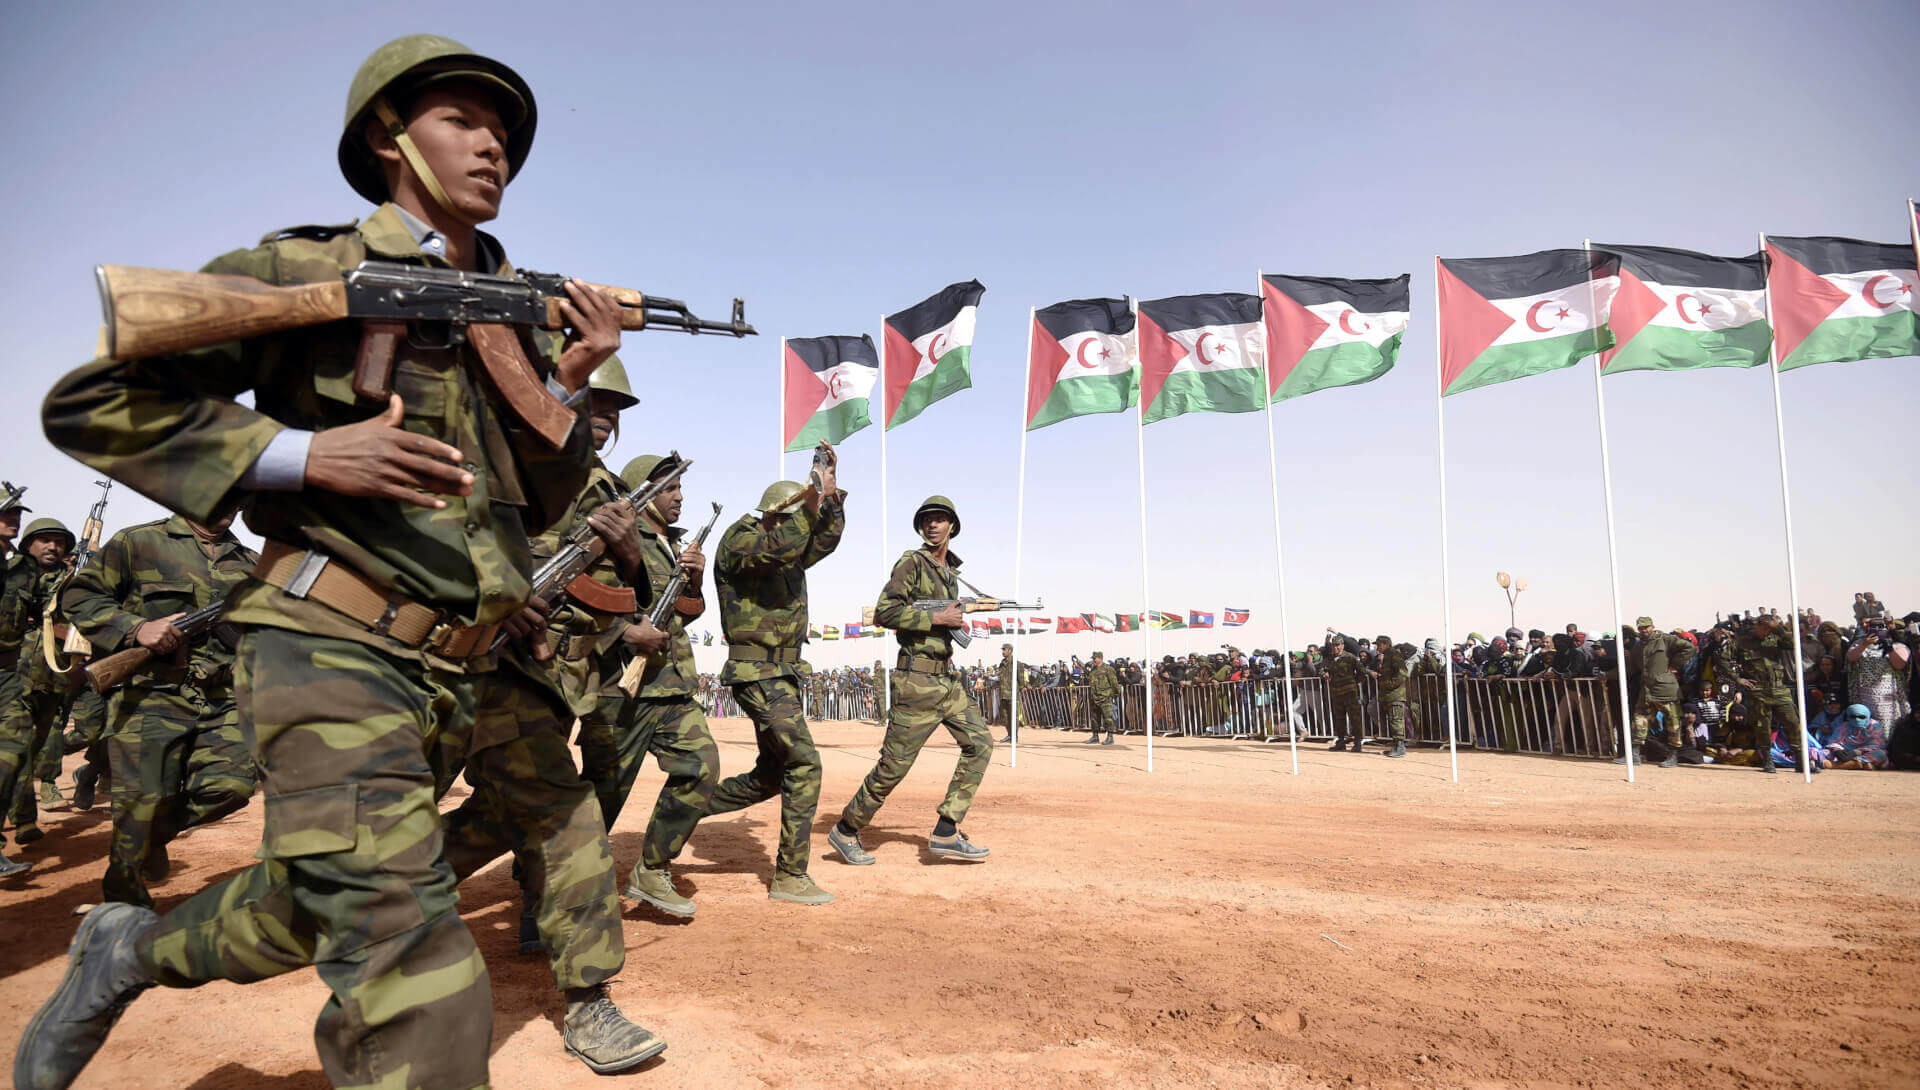 Morocco Nears War With Polisario Front in Western Sahara After End to 29-Year Ceasefire